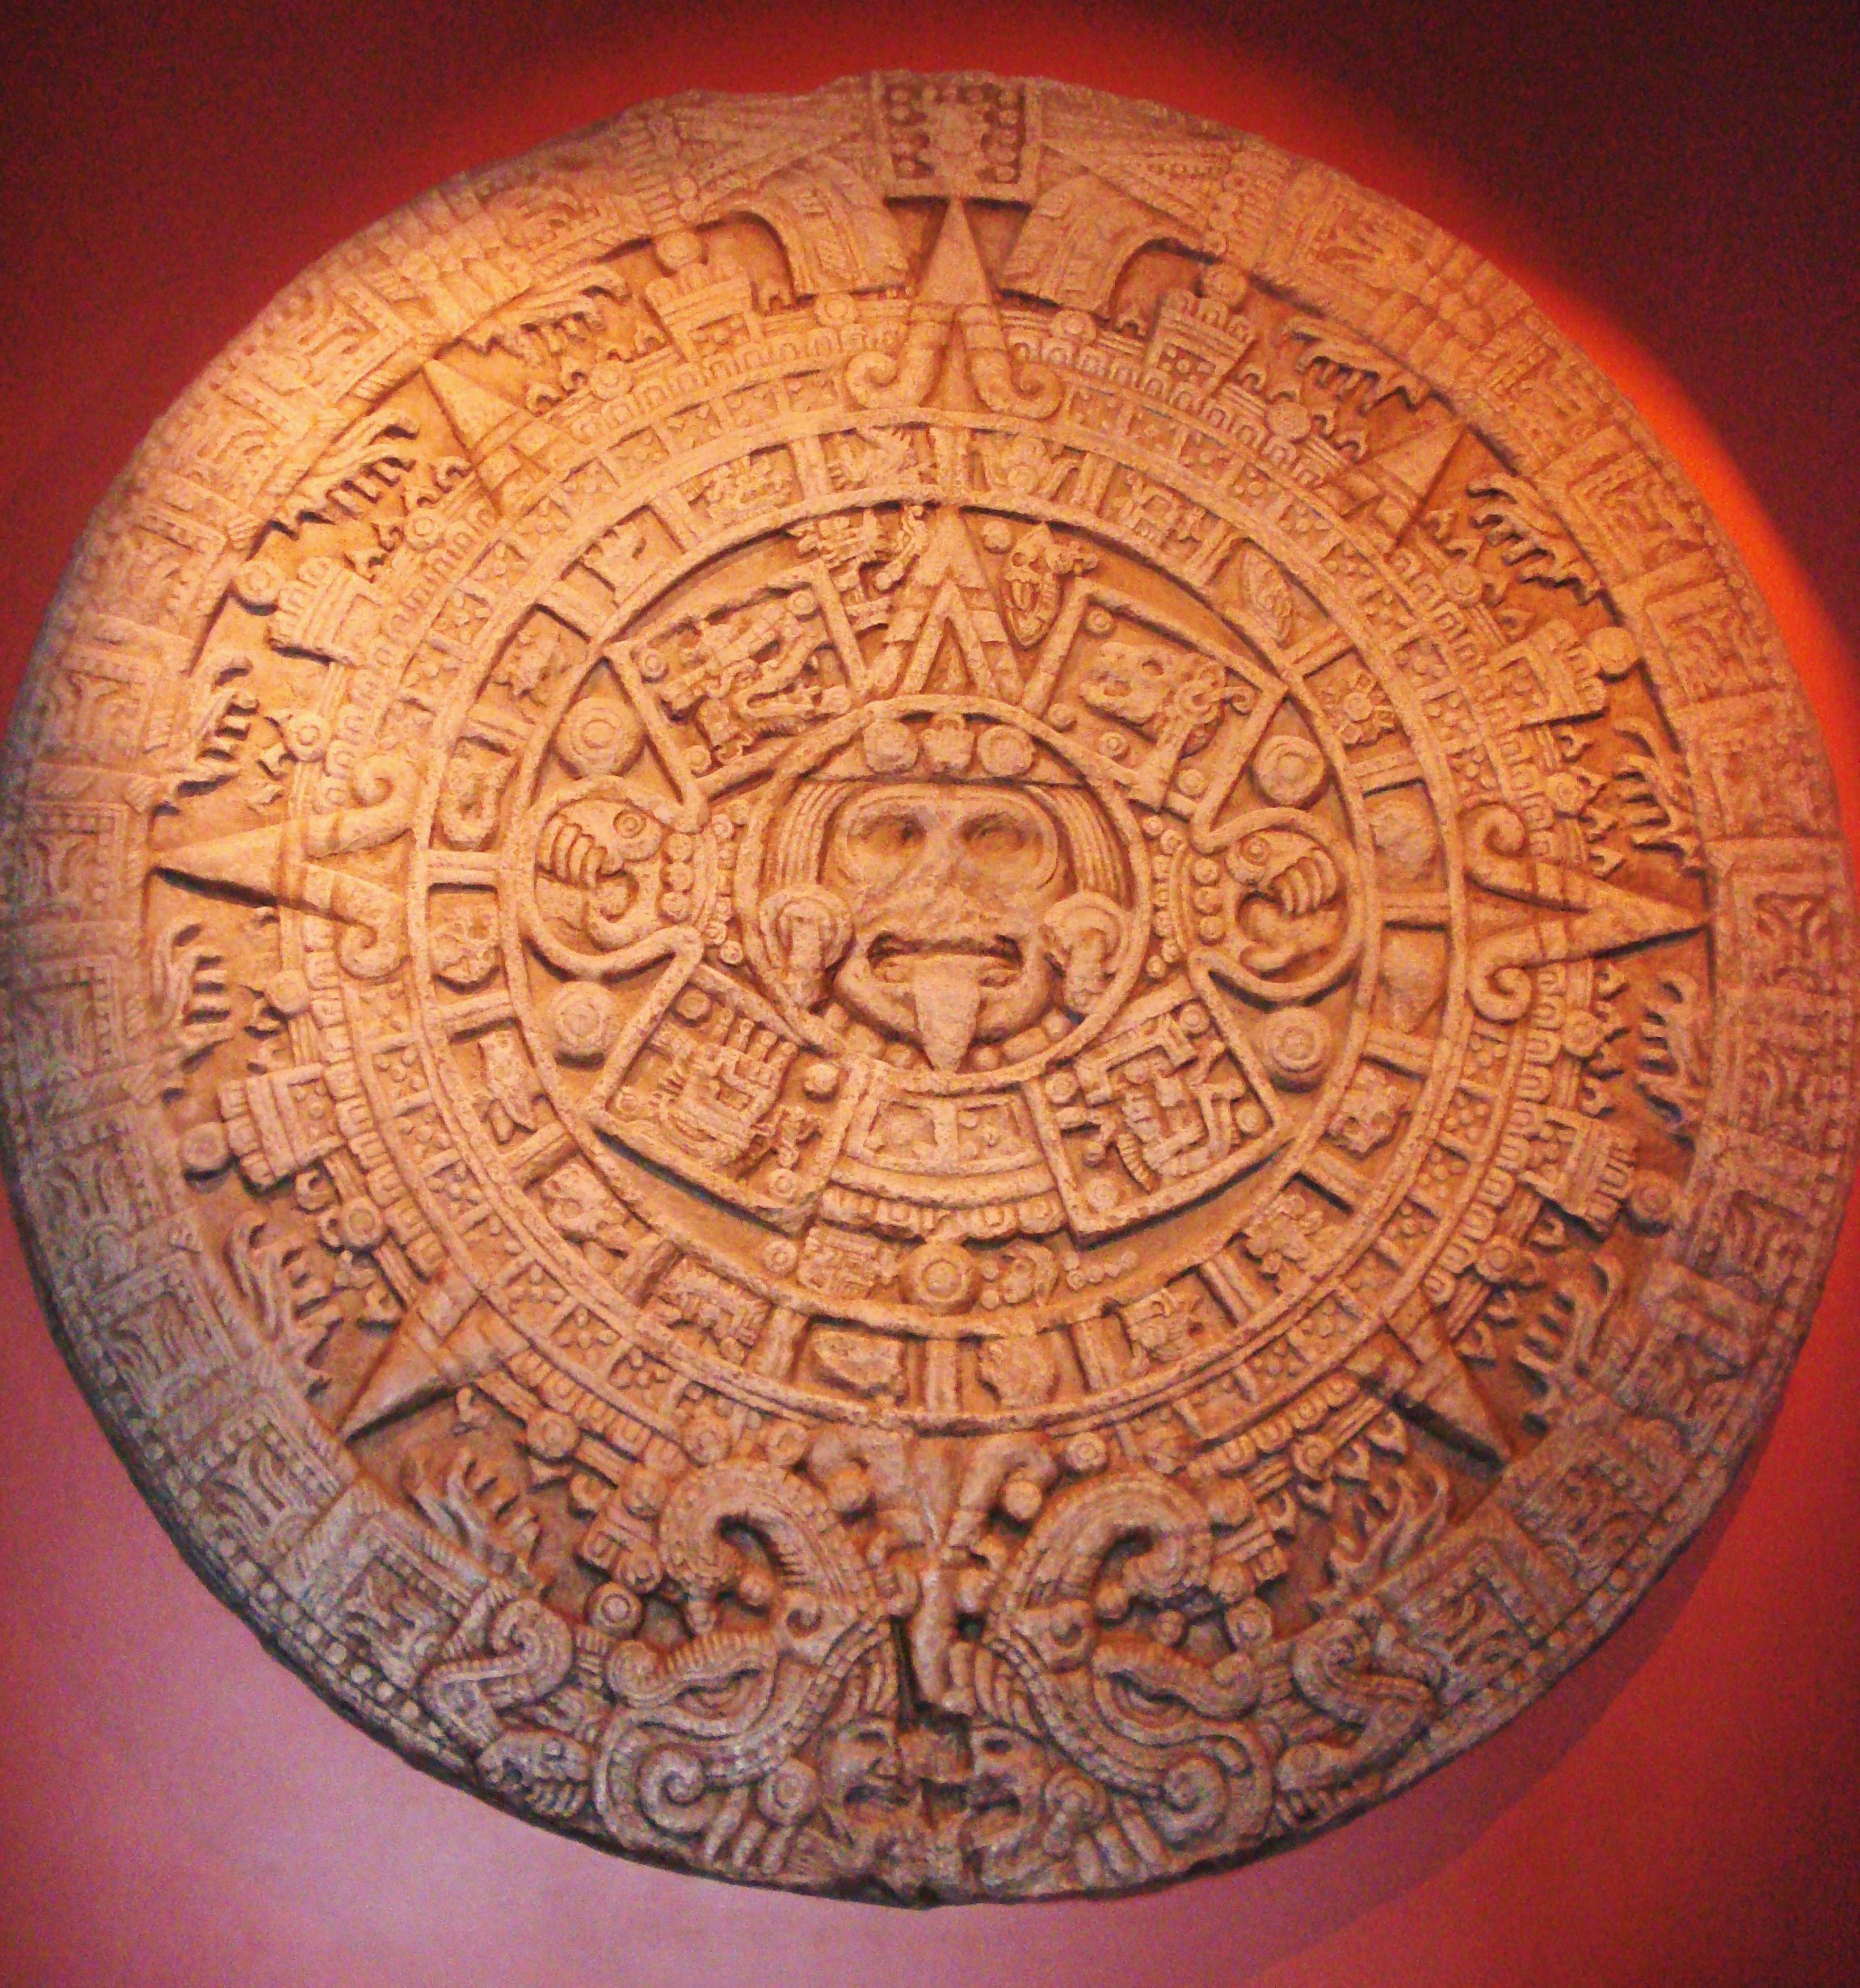 An analysis of the description of the aztec nation